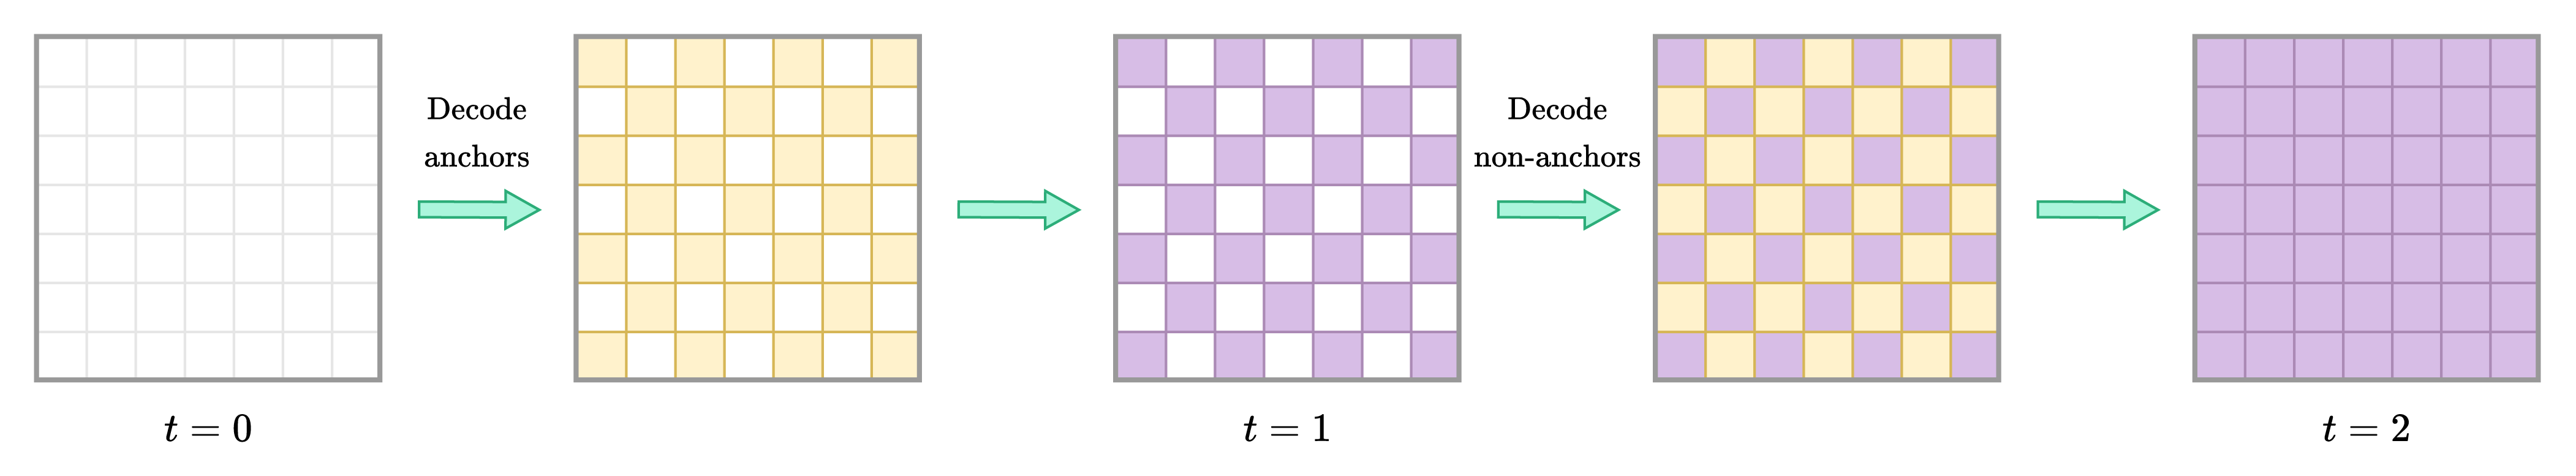 Latent tensor state at various time steps during the decoding process using the autoregressive 'checkerboard' context model.